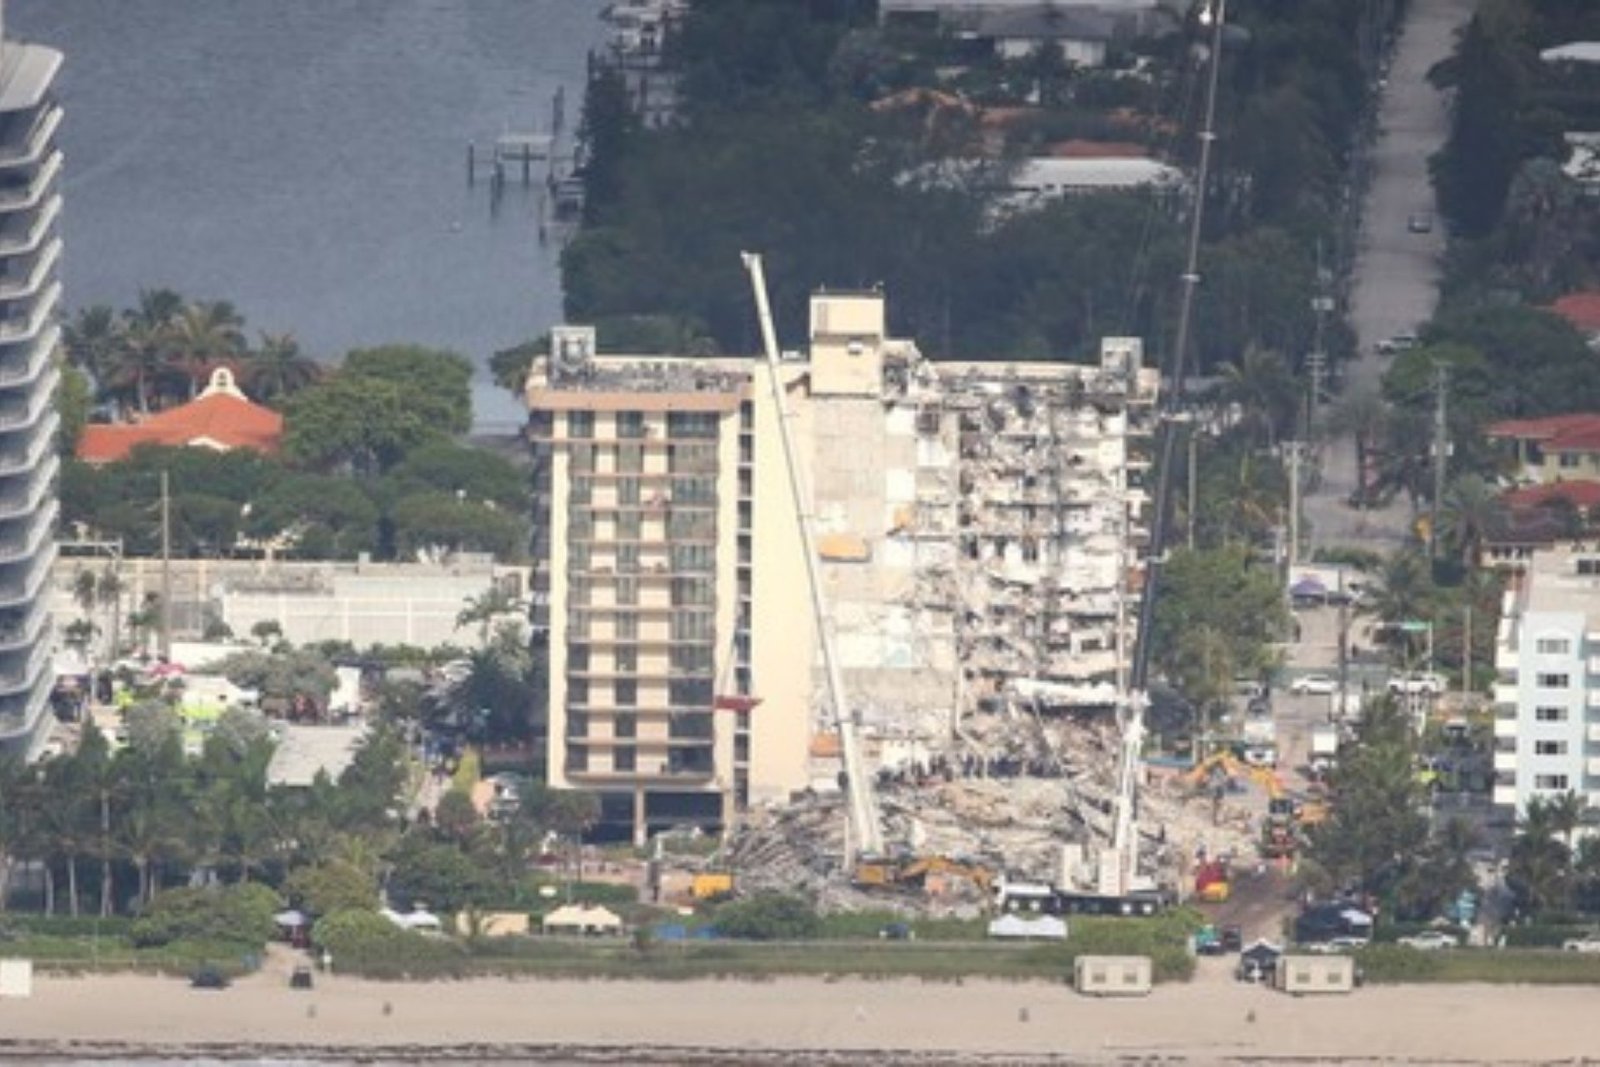 Florida Official Stated That The Building Was Safe Despite The Warning